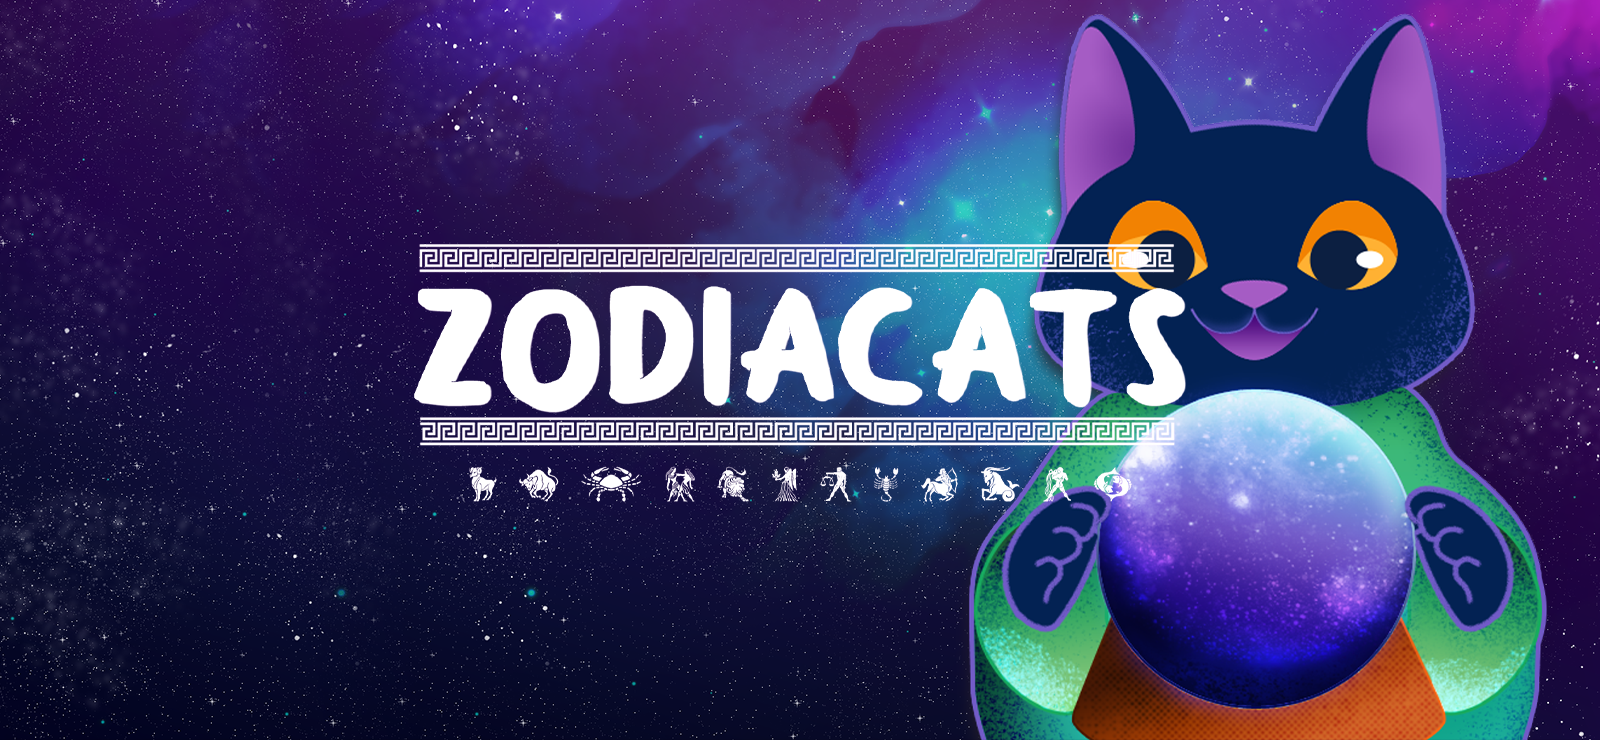 Zodiacats - Supporter Pack